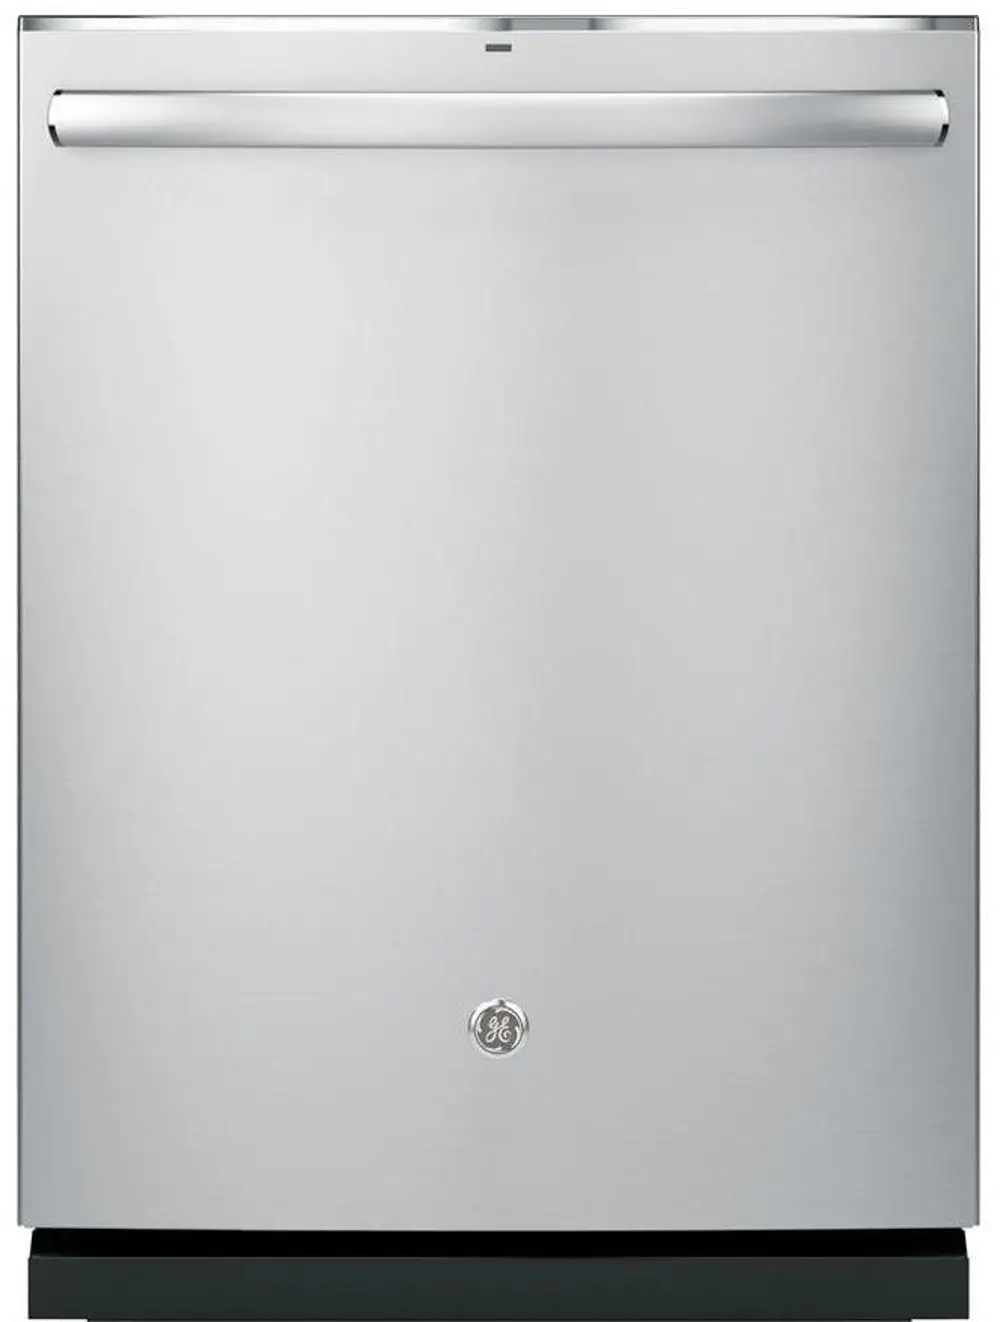 GDT695SSJSS GE Dishwasher with Steel Interior - Stainless Steel-1